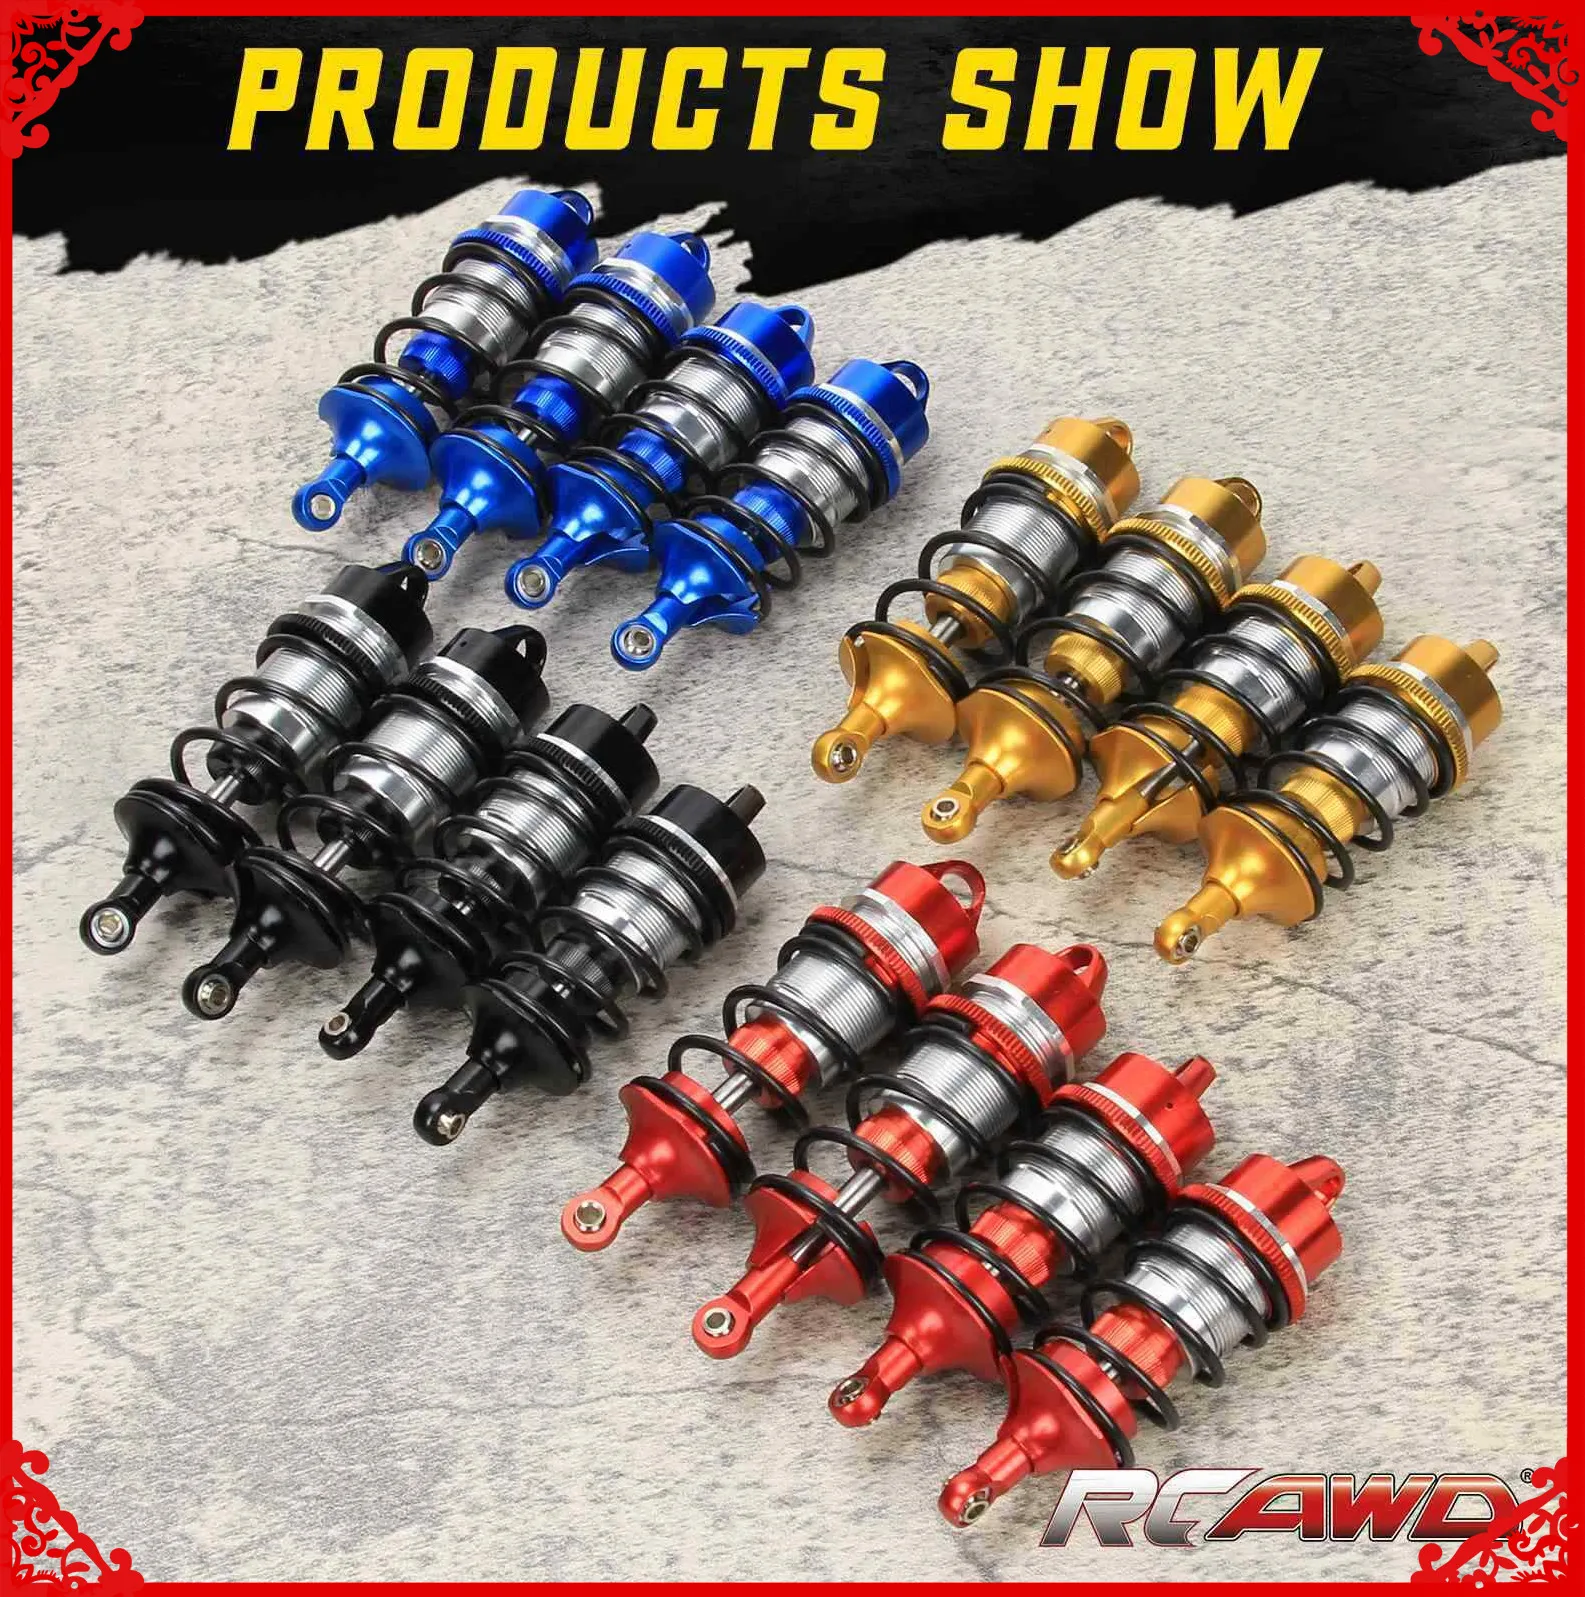 RCAWD ARA330627 Front Rear Shocks For Arrma FELONY INFRACTION LIMITLESS 6S BLX upgrade parts